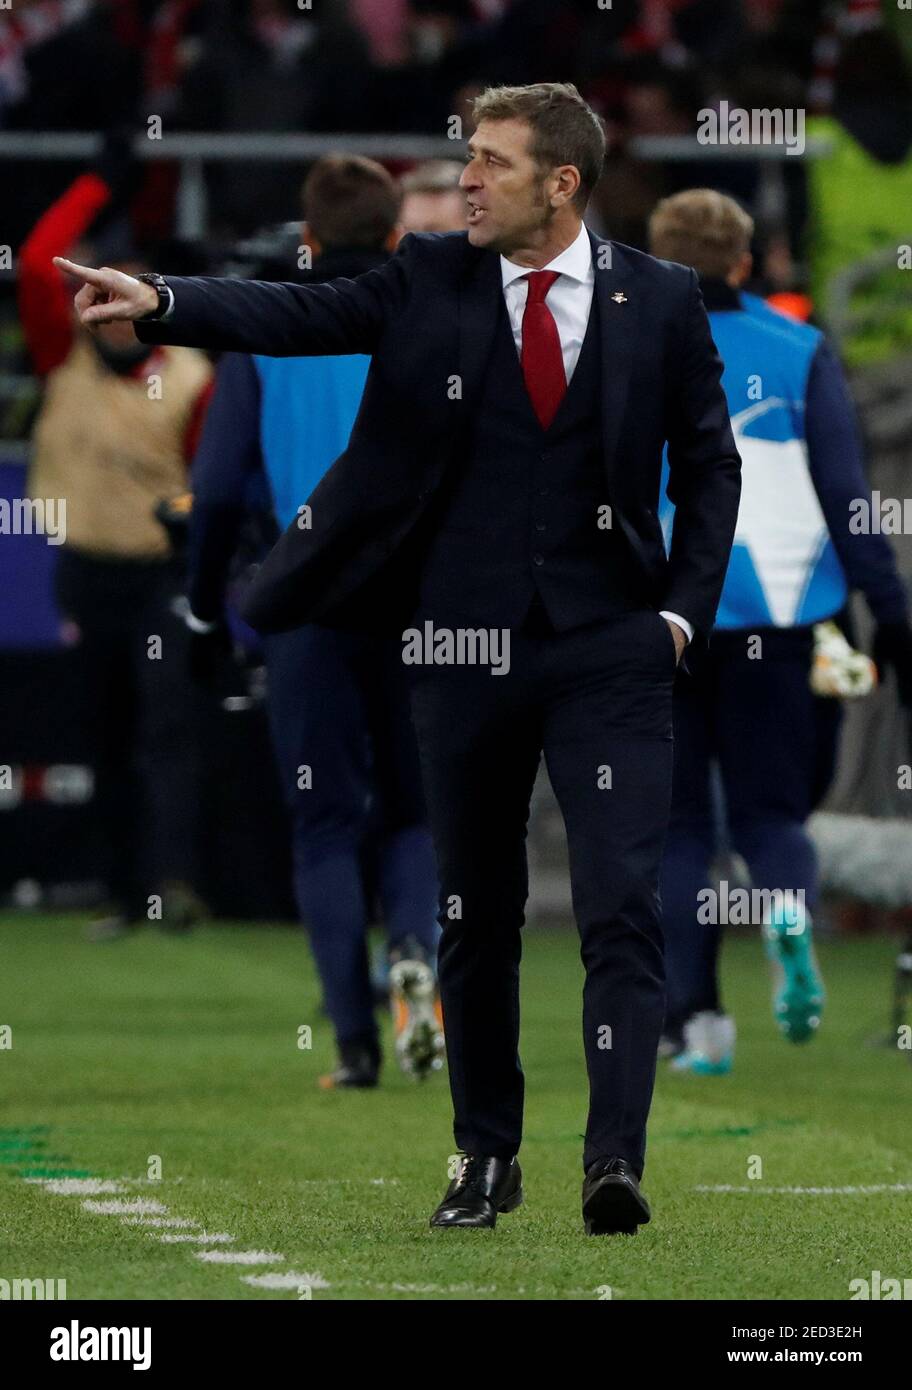 Soccer Football - Champions League - Spartak Moscow vs Sevilla - Otkrytiye  Arena, Moscow, Russia - October 17, 2017 Spartak Moscow coach Massimo  Carrera gestures REUTERS/Grigory Dukor Stock Photo - Alamy